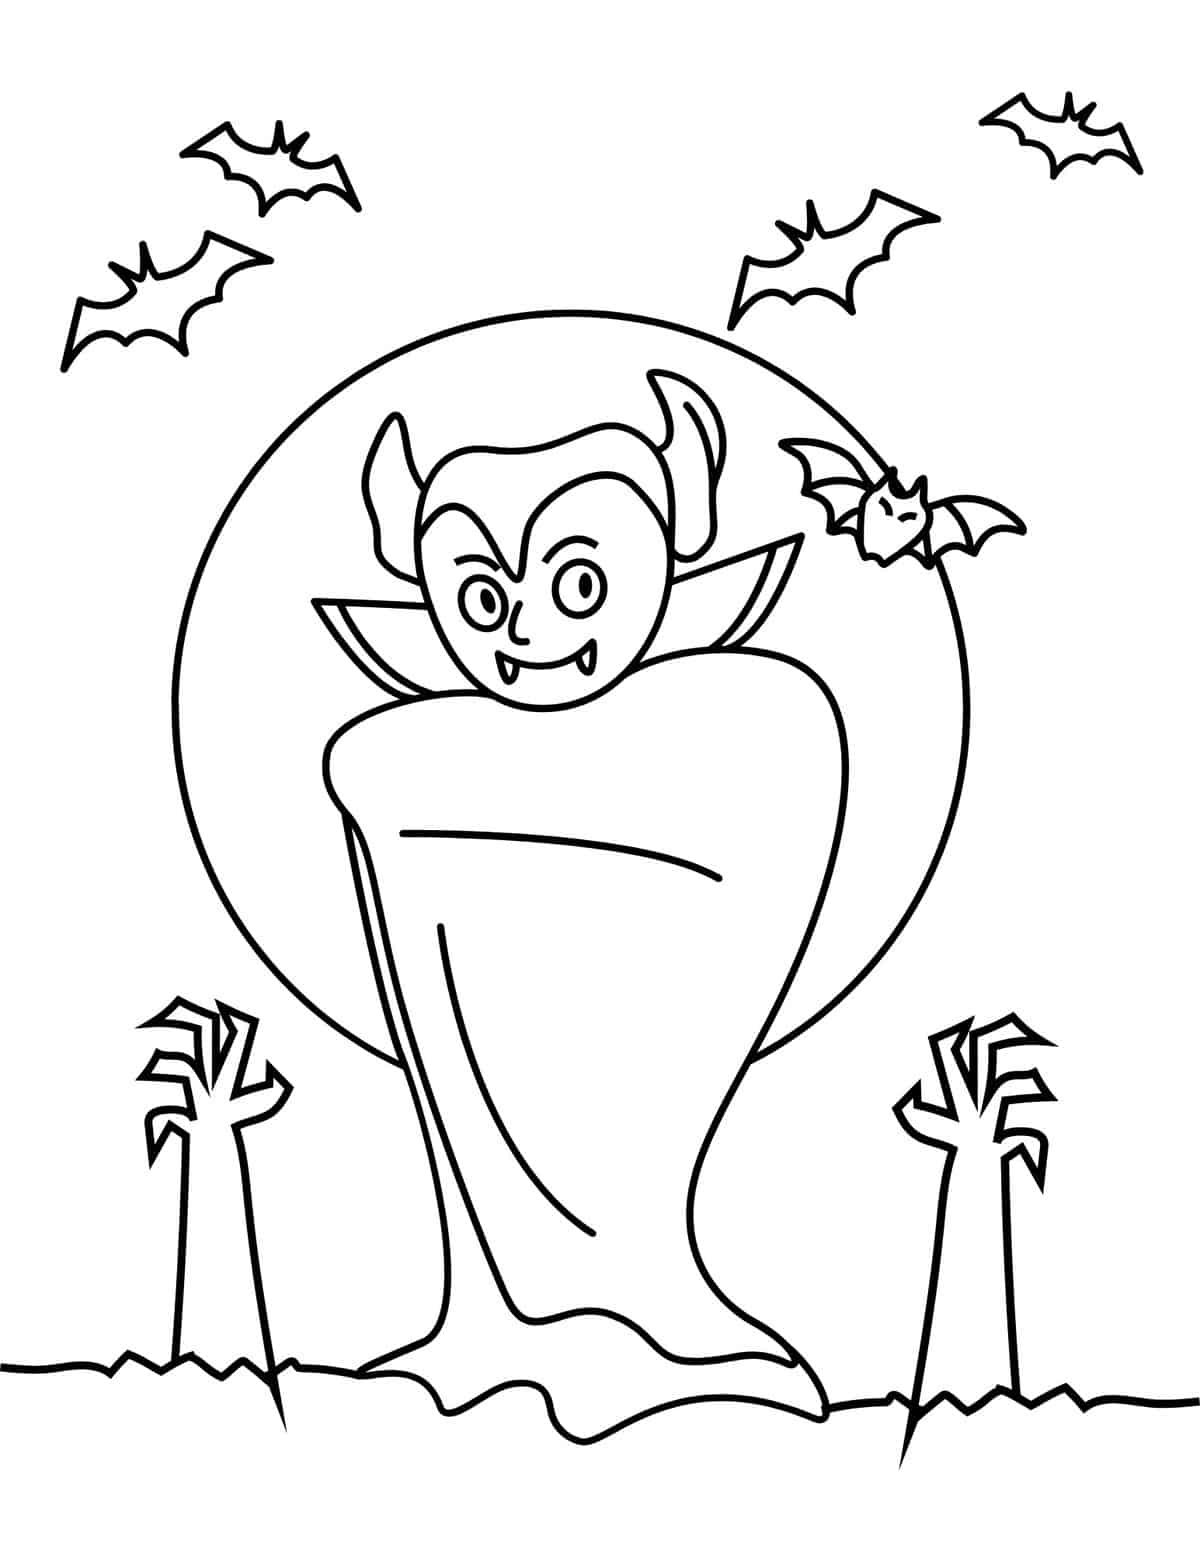 vampire coloring page for halloween